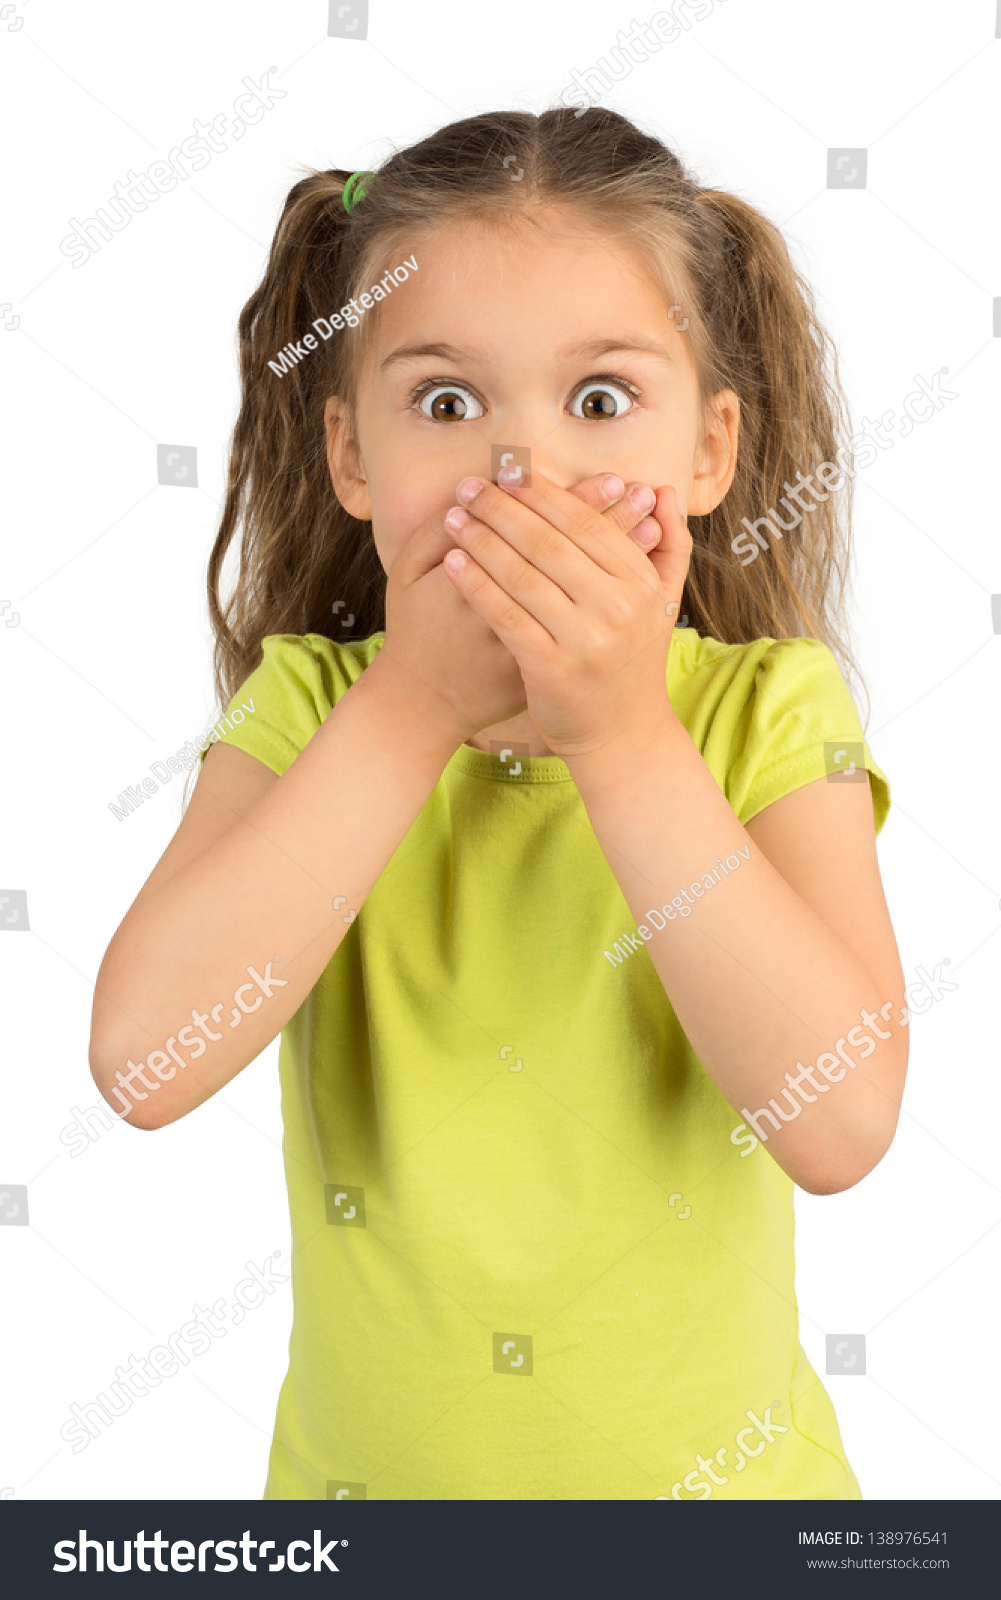 Cute Little Girl Covering Her Mouth Showing Intense Expression of Fear and Terror, Isolated #138976541